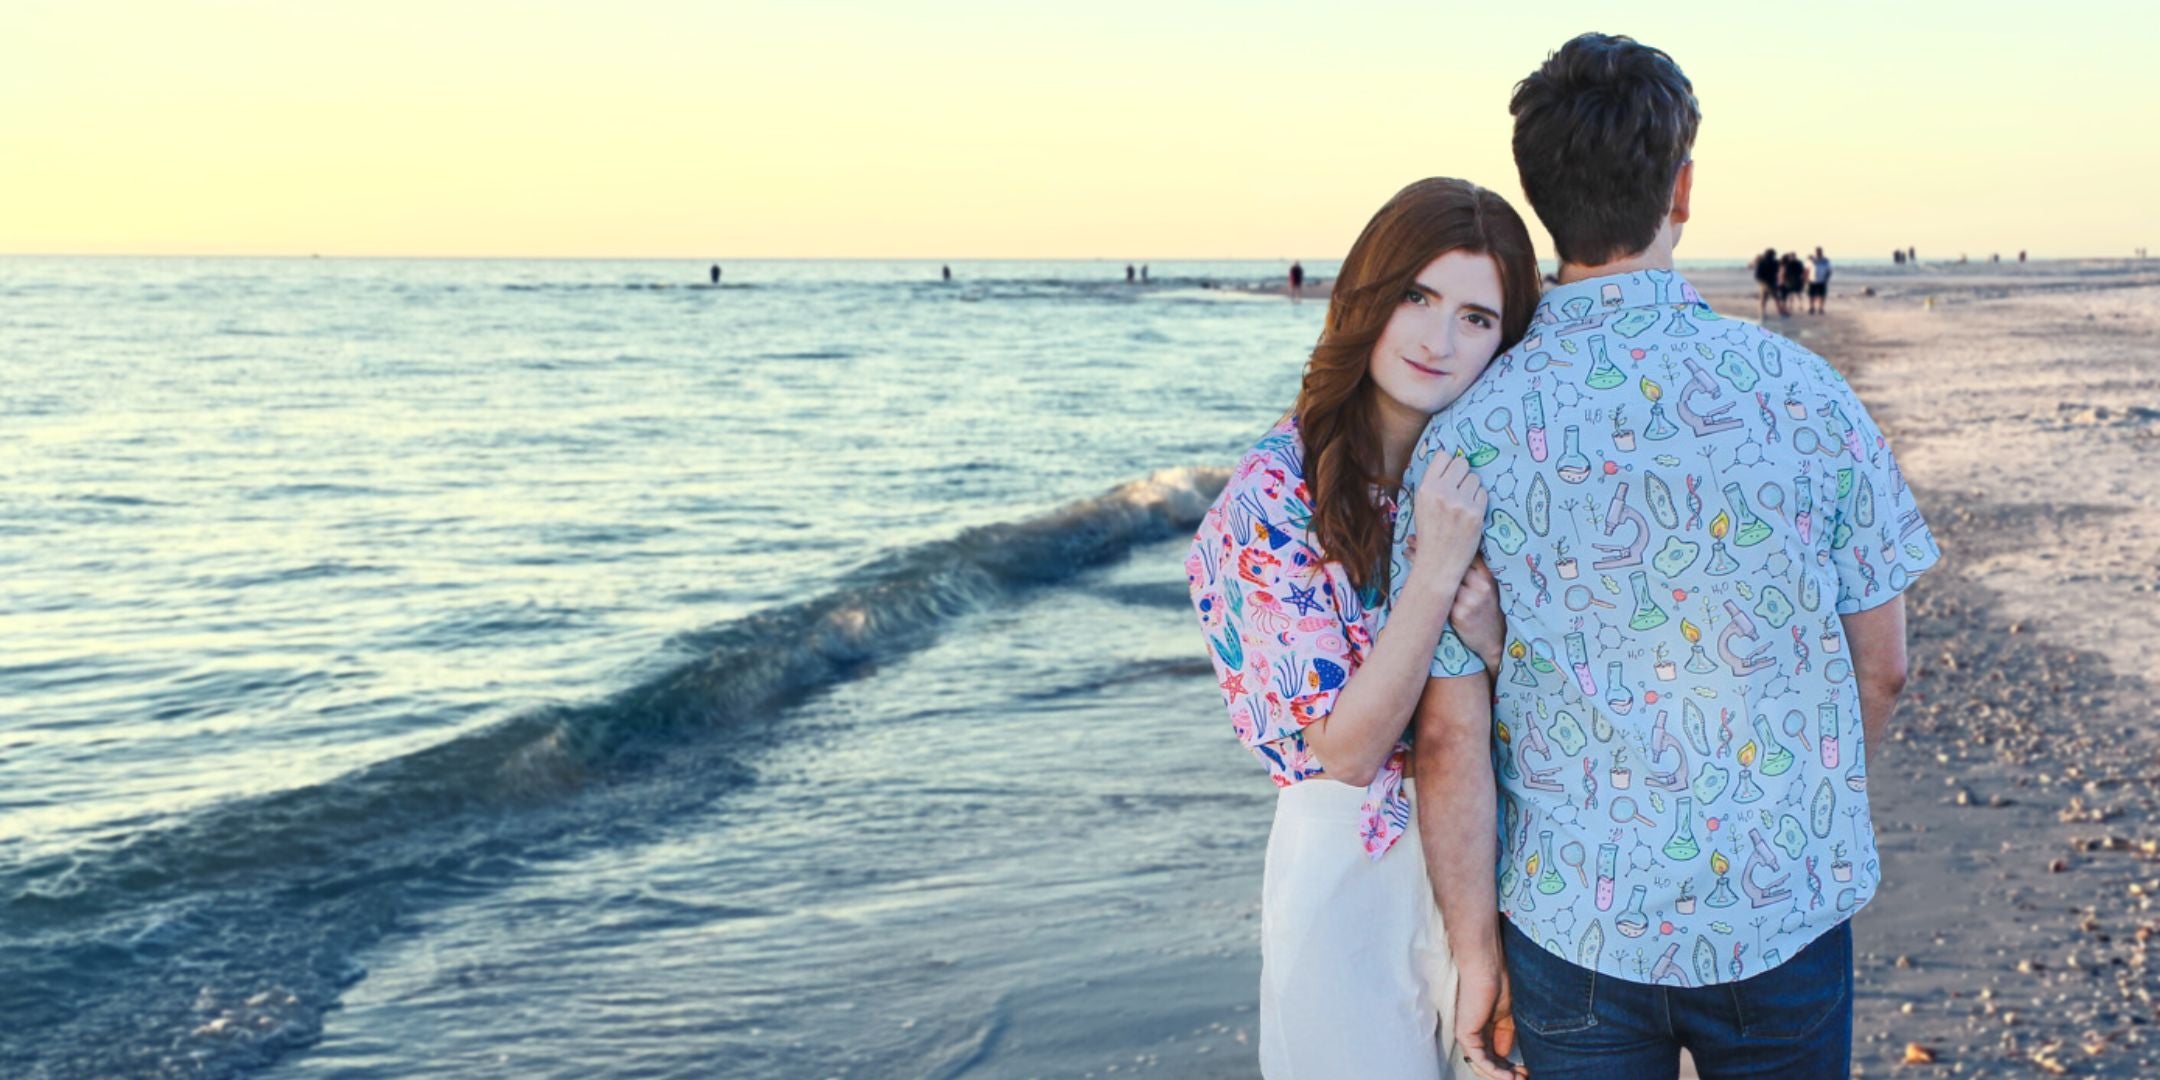 A couple wearing nerdy science button up shirts standing on the beach during a beautiful sunset. They are holding hands and smiling at each other while the waves are crashing behind them. The man's shirt has a pattern of DNA strands and the woman's shirt has a print of the periodic table.